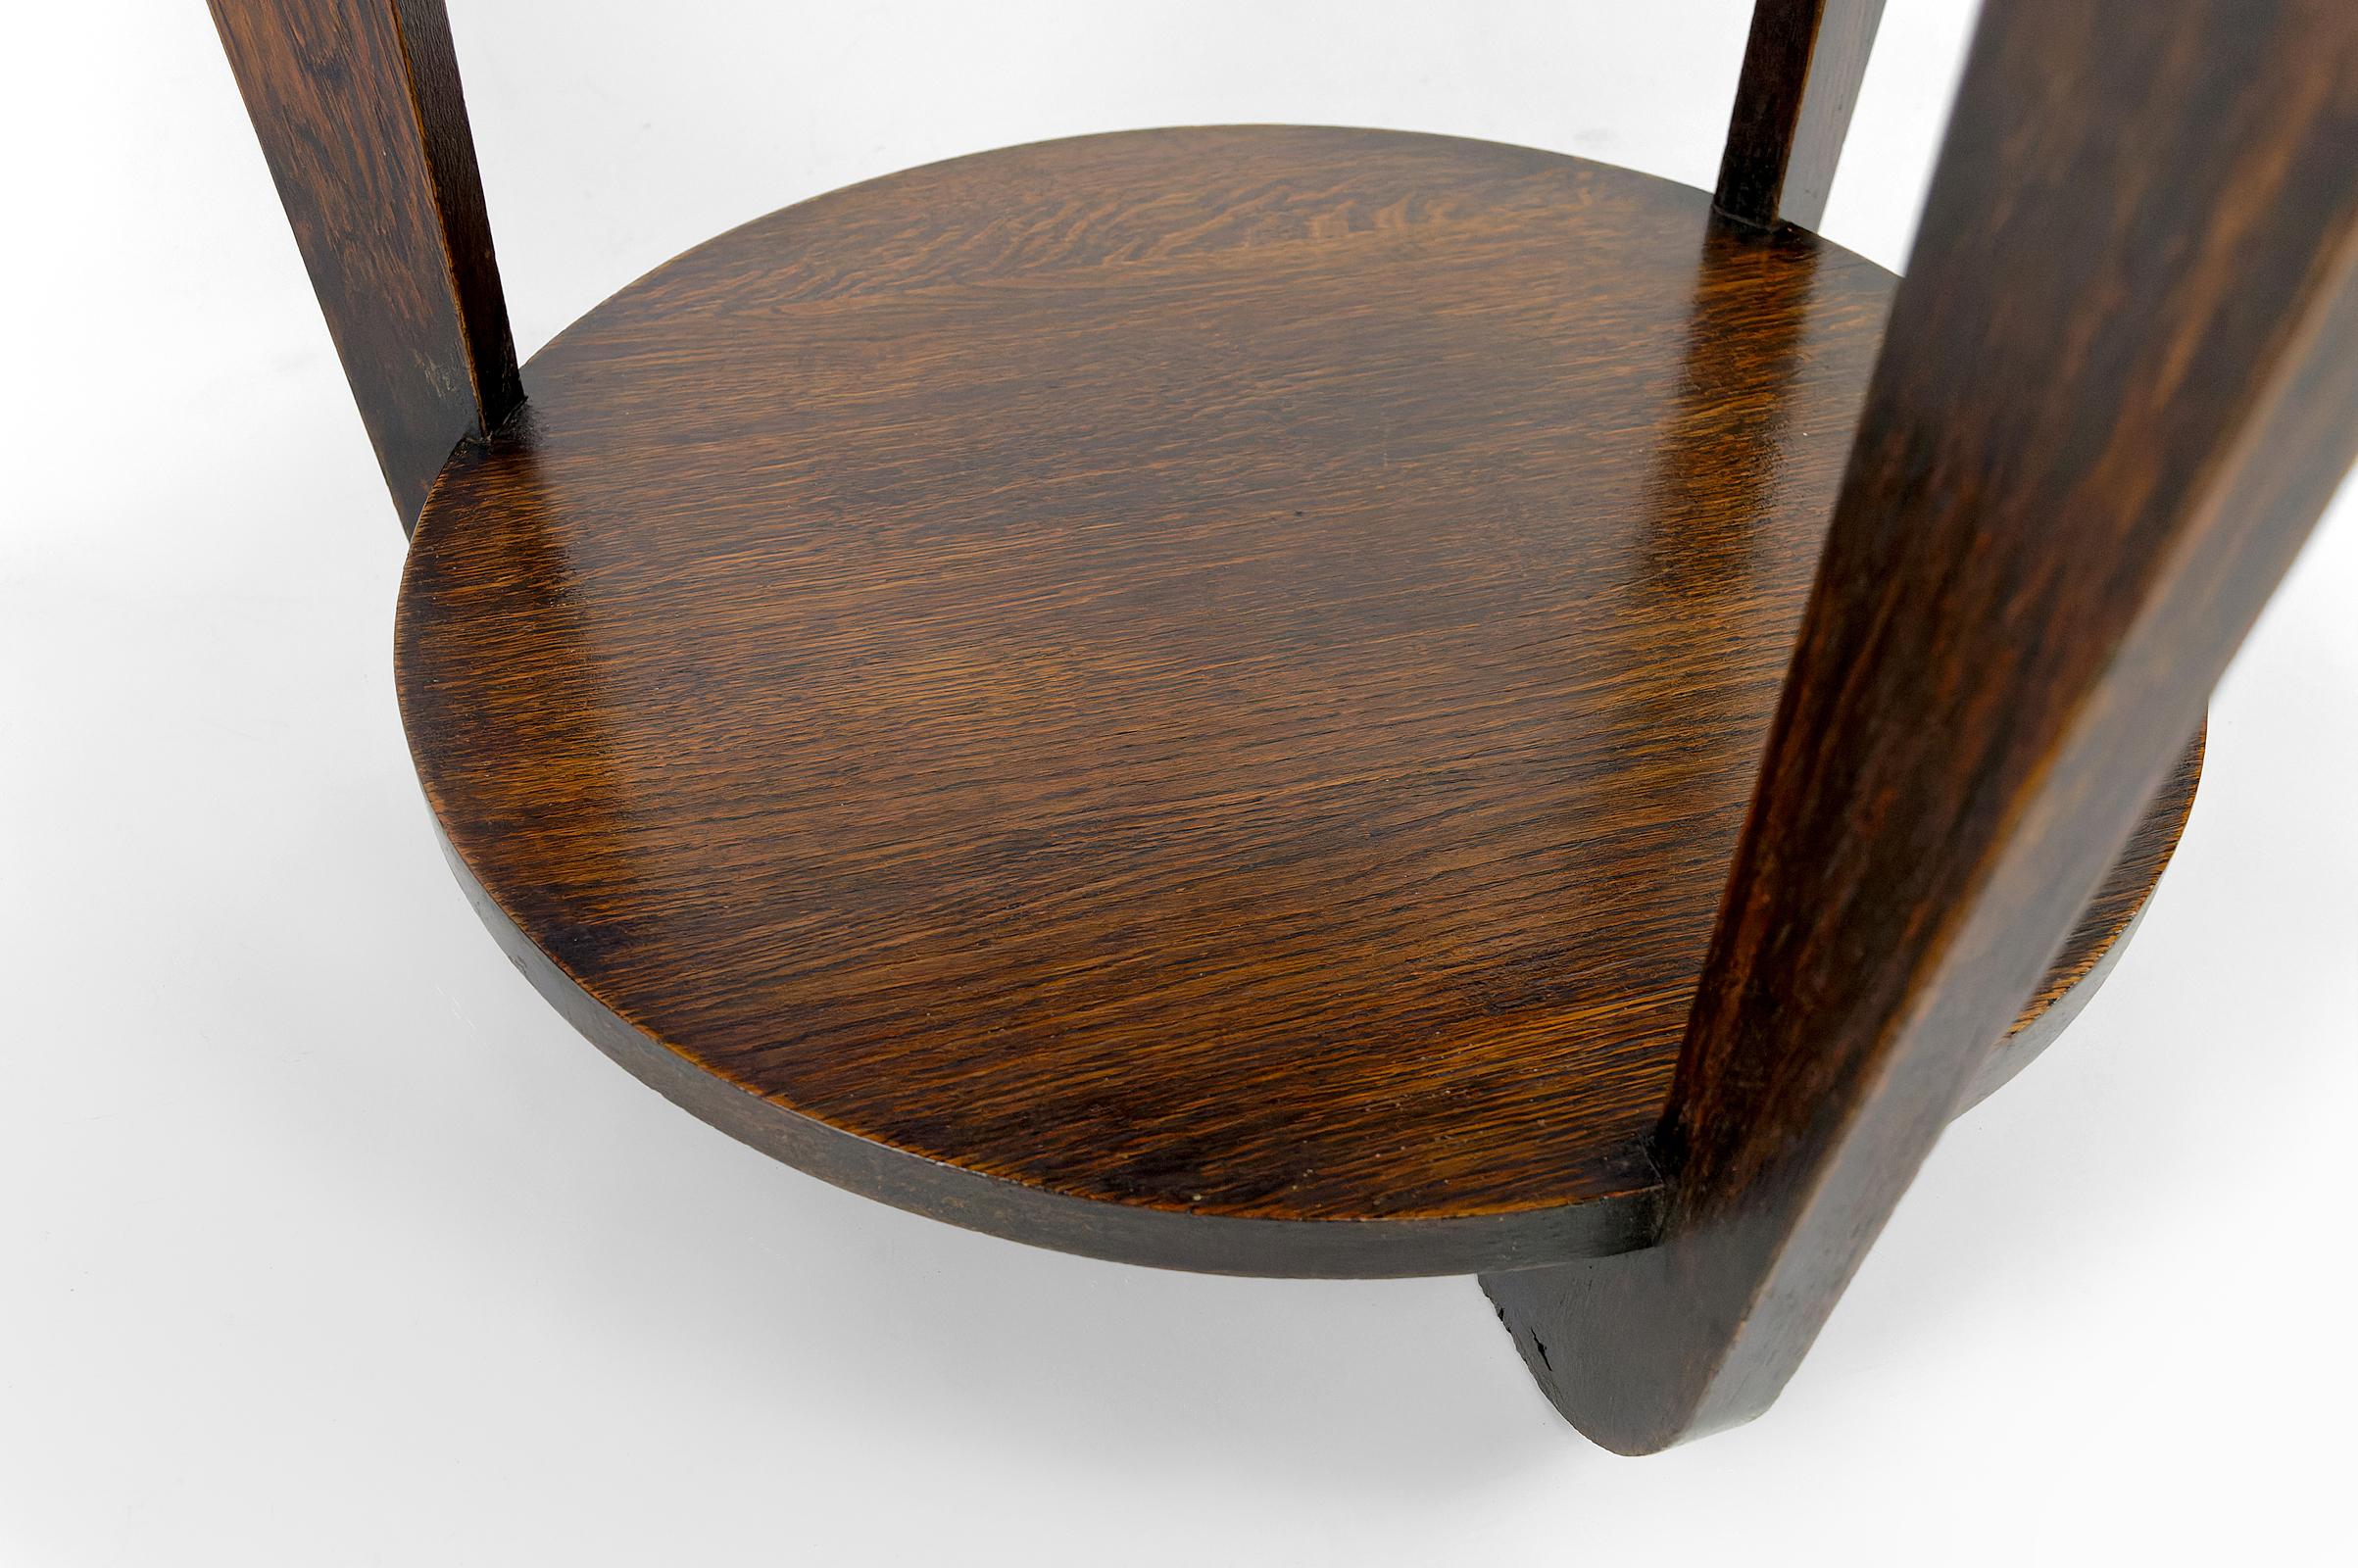 Modernist Art Deco round pedestal table in patinated oak, France, Circa 1930 For Sale 6